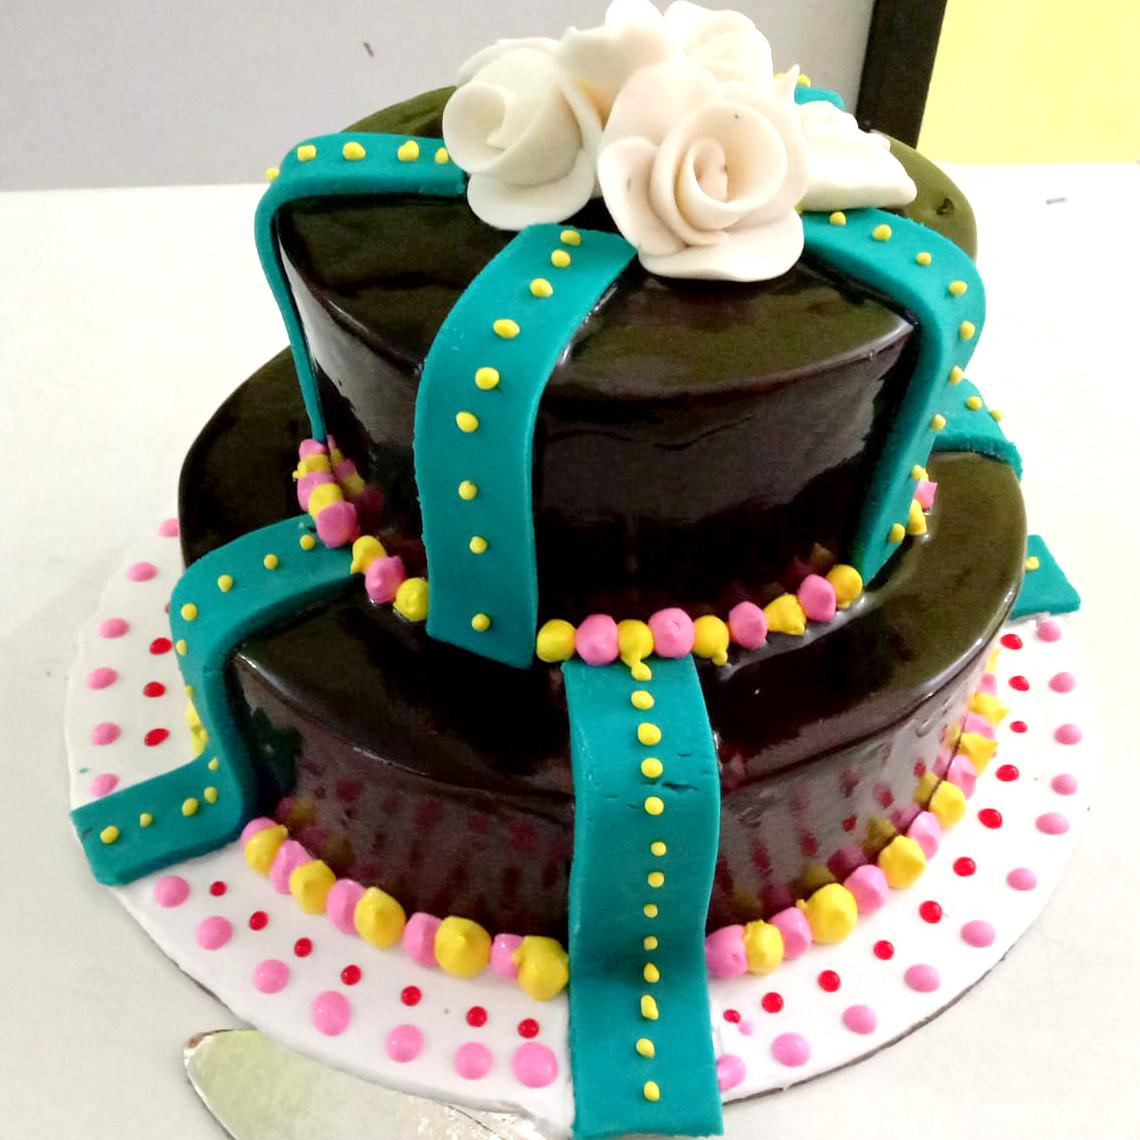 PULL ME UP CAKE! │ FOUNTAIN CAKE │ CHOCOLATE EXPLOSION CAKE │ CAKE TRENDS │  CAKES BY MK - YouTube